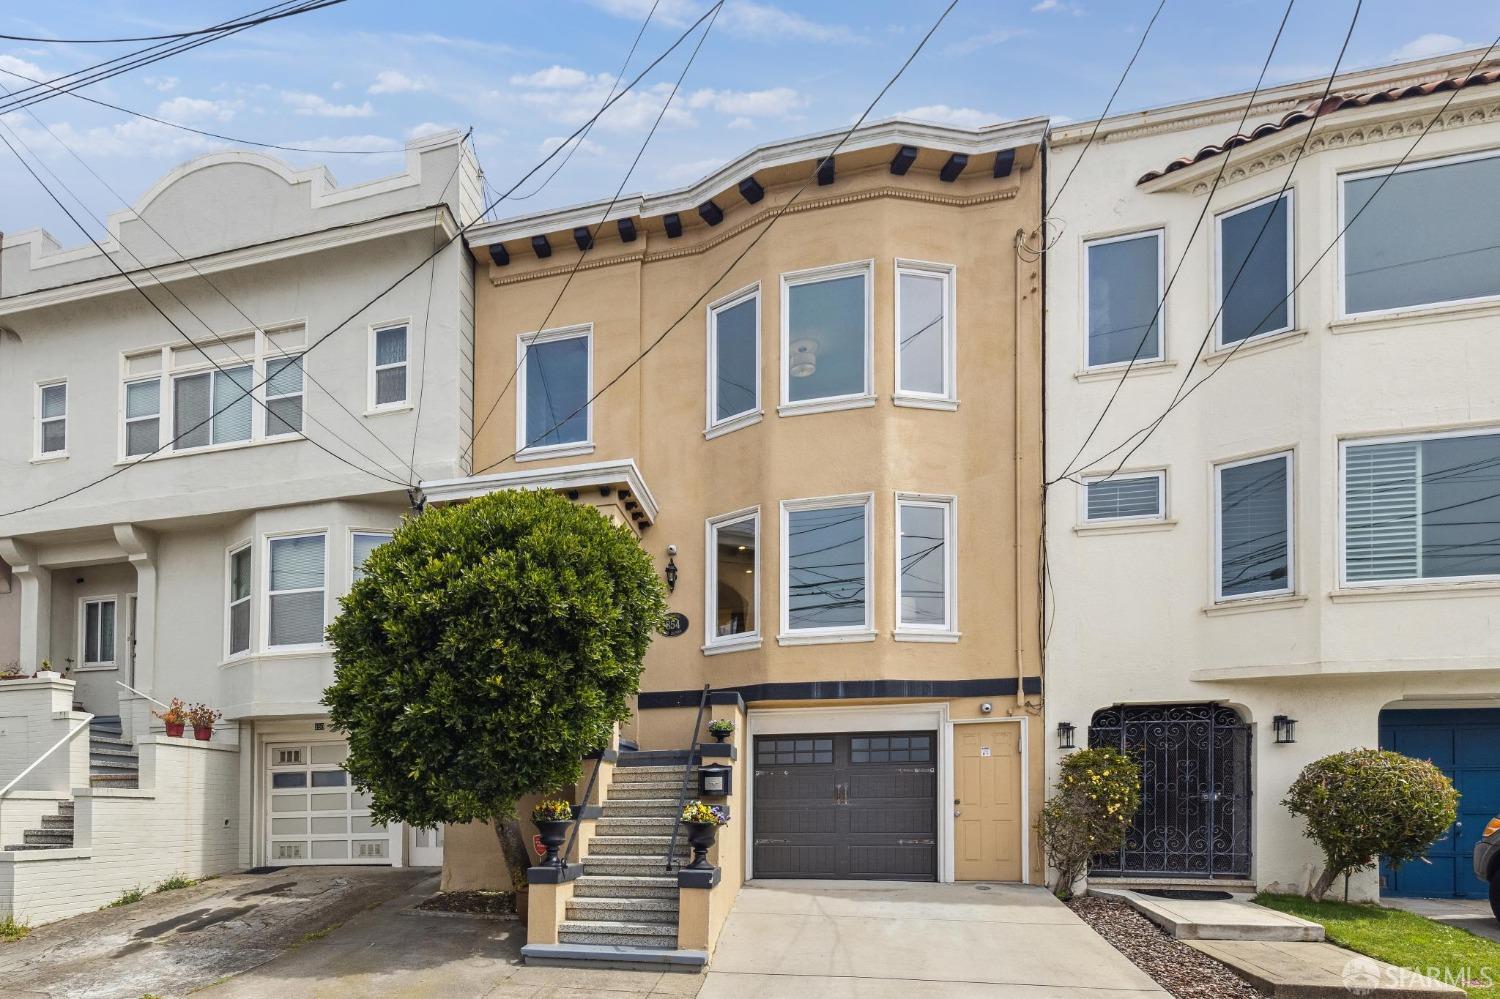 Photo of 854 43rd Ave in San Francisco, CA